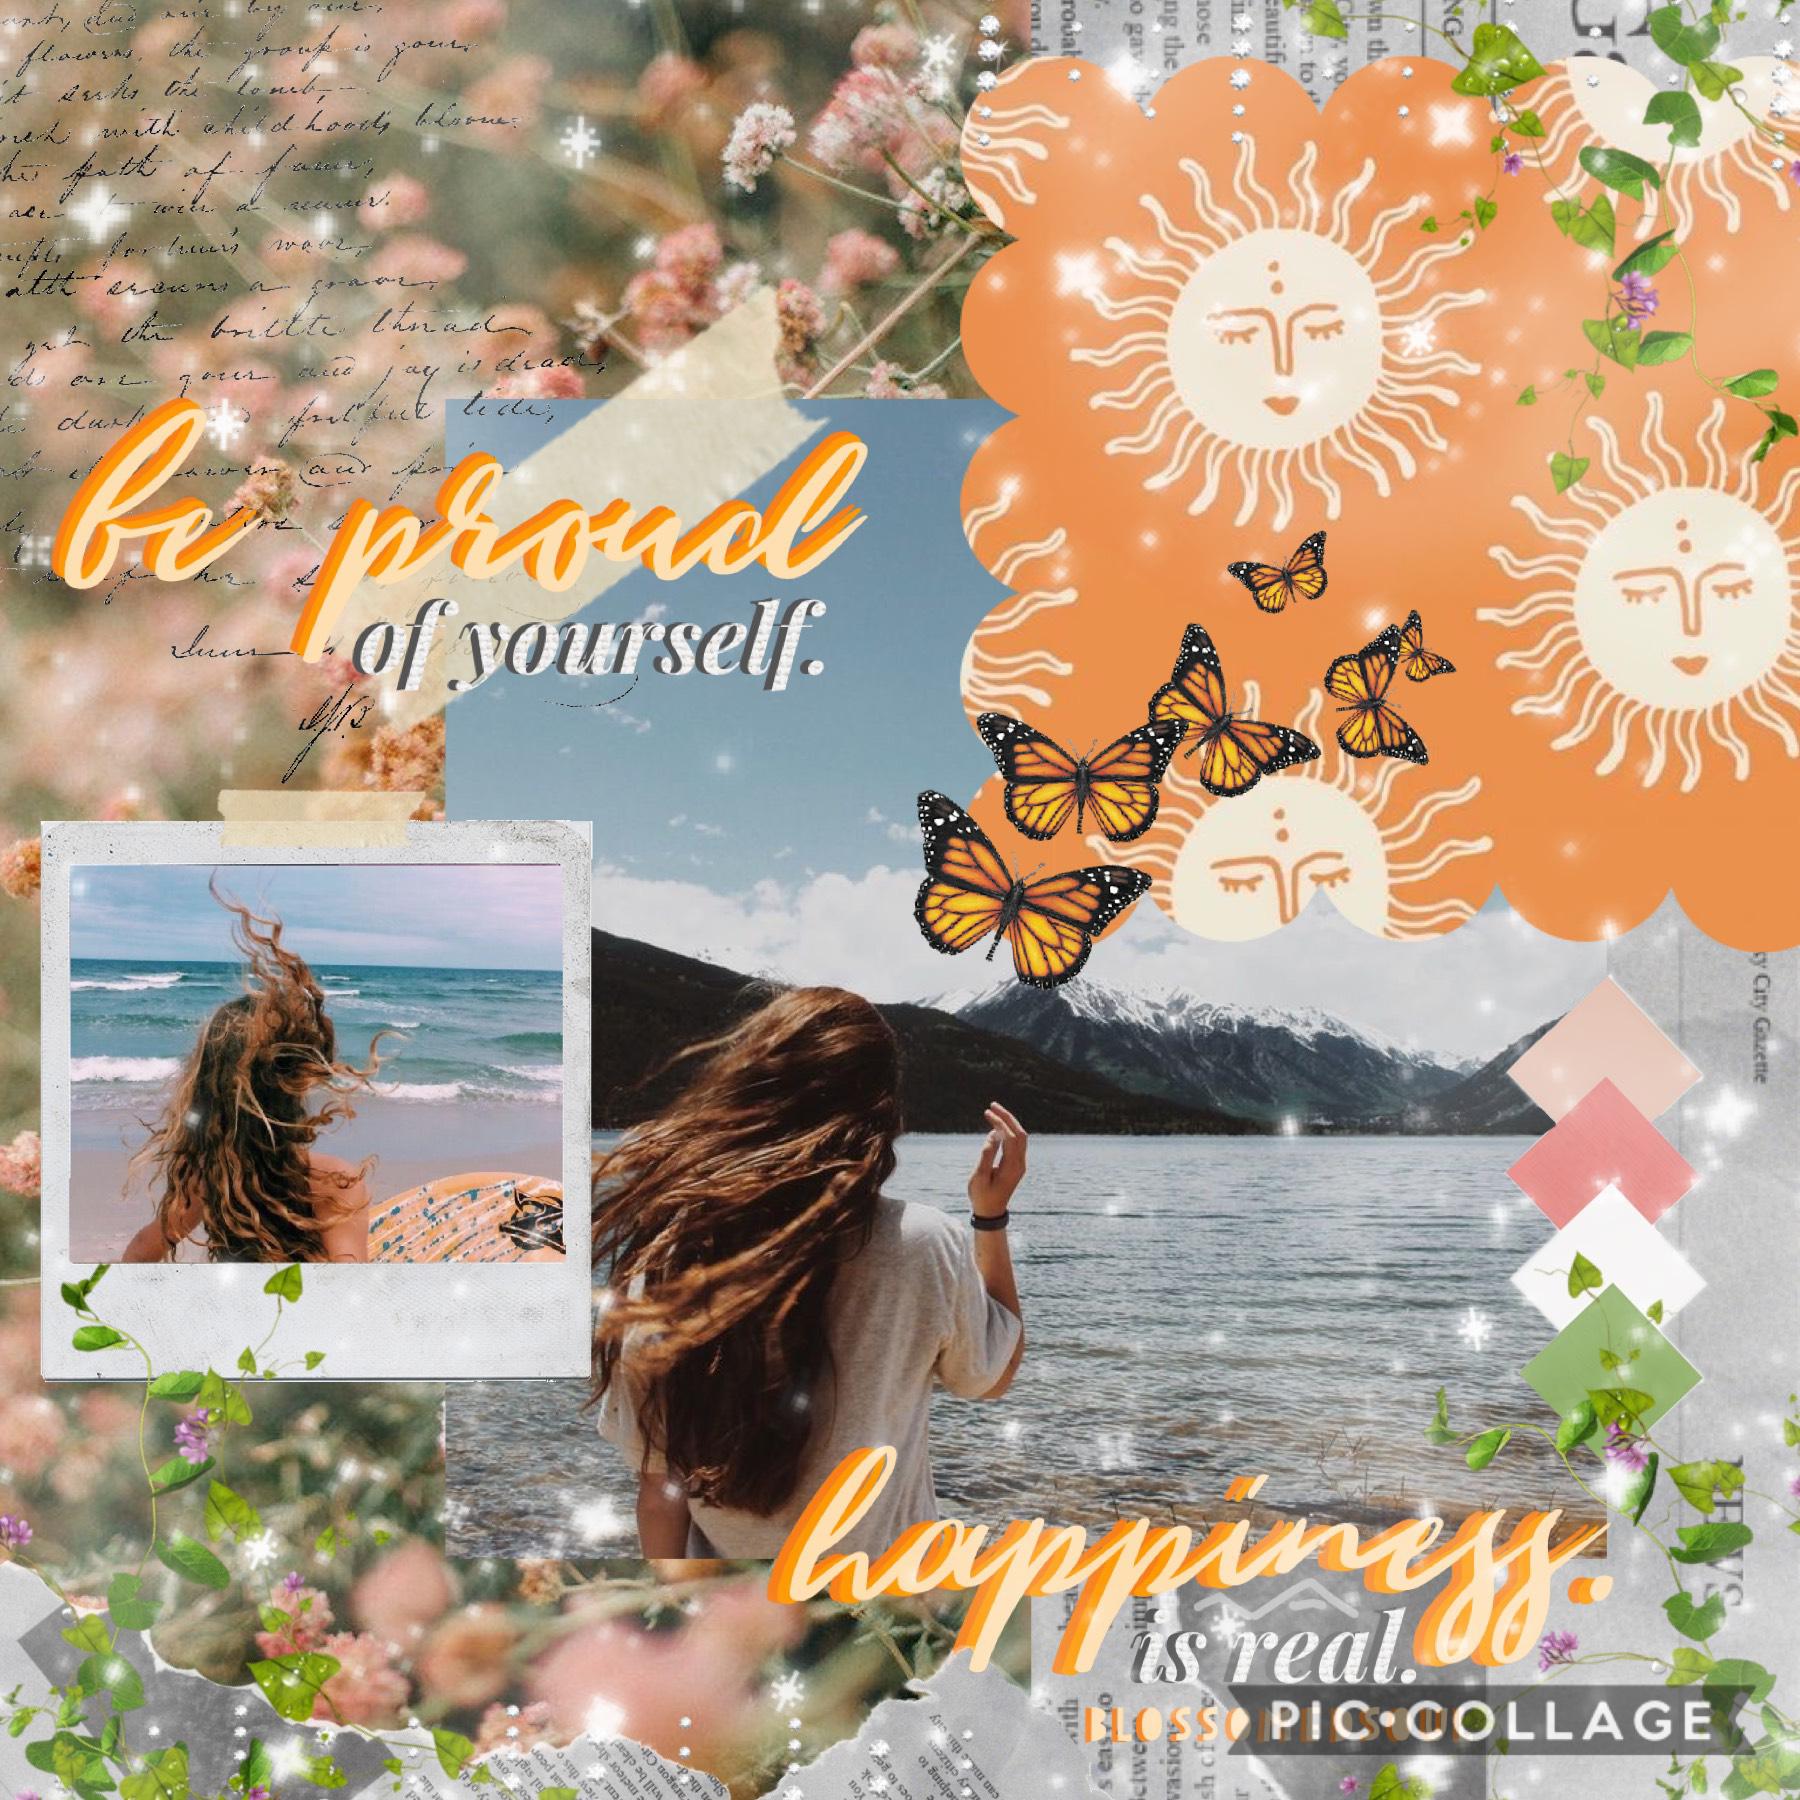 [ t a p ]

i tried out something new! i’ve been wanting to make a collage like this for a while now and i finally found the right pictures 🤩💕this one is kind of simple but i’m planning on improving! ❤️🌿 qotd: butterflies or dragonflies? aotd: butterflies 